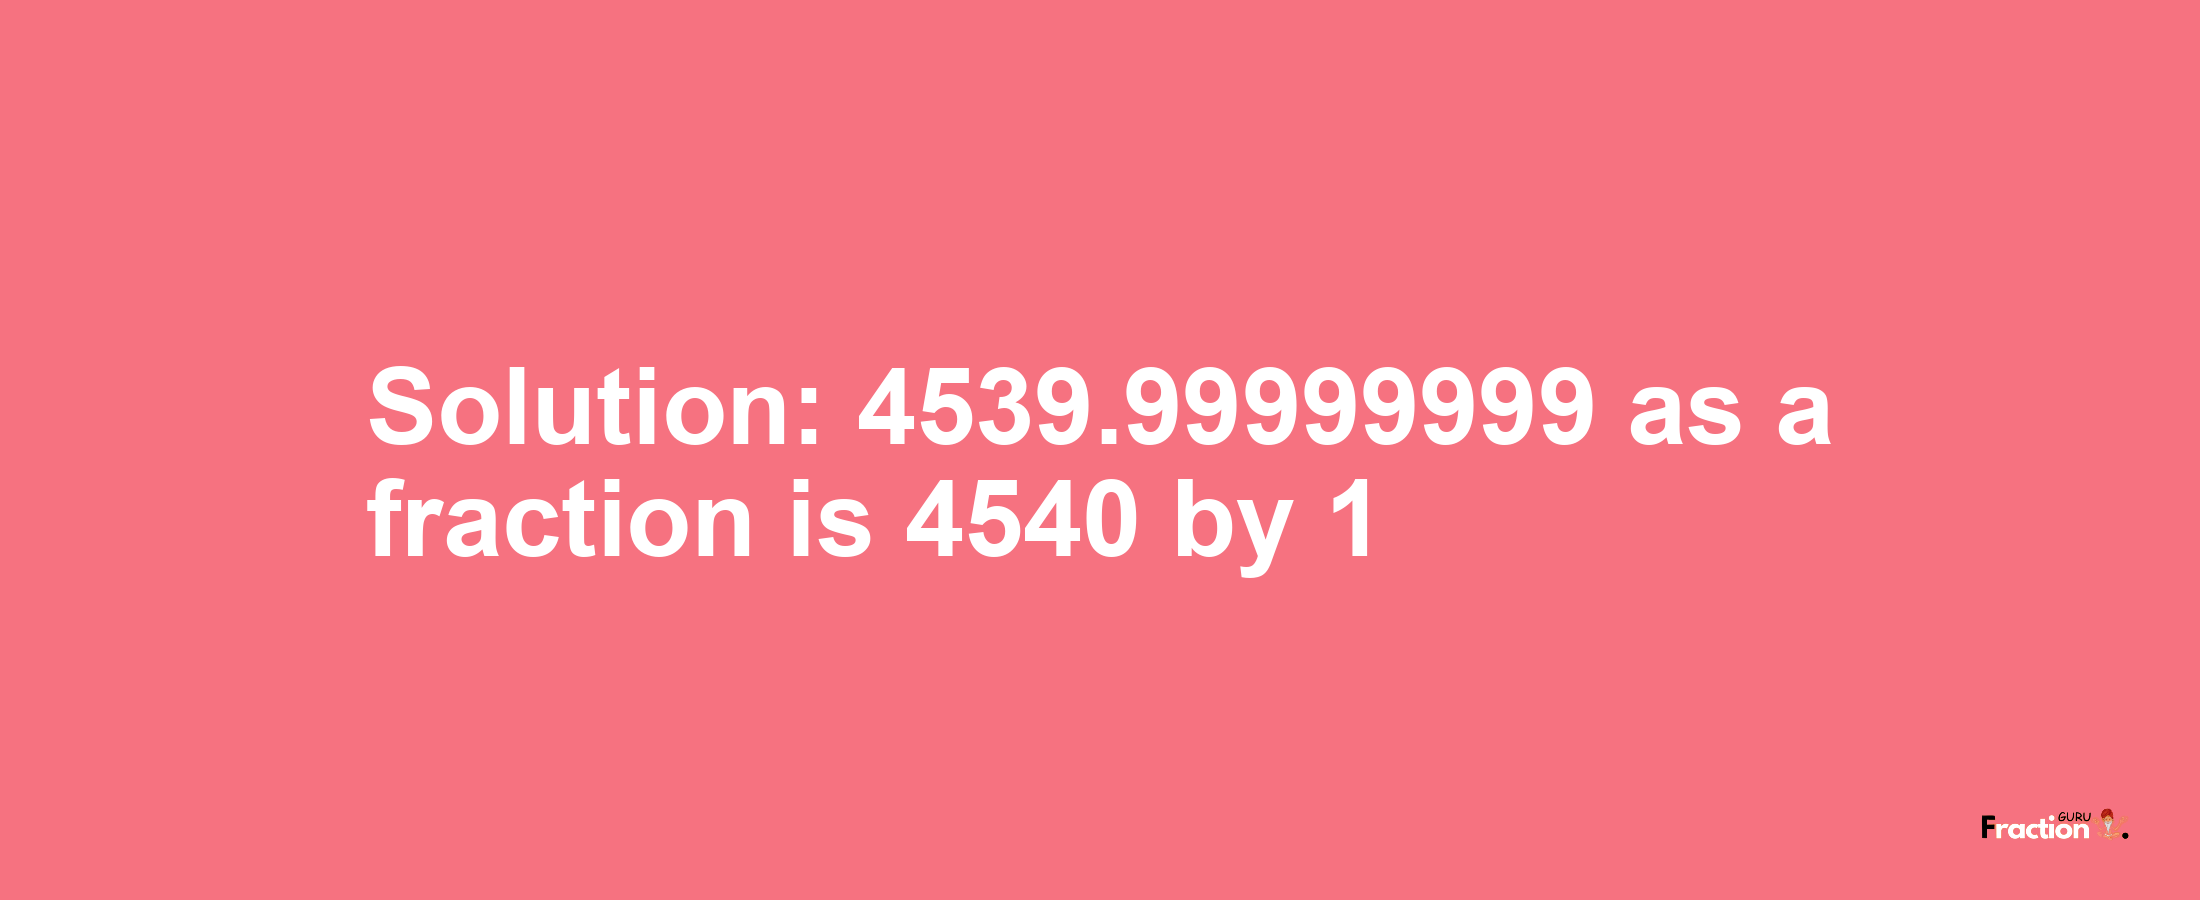 Solution:4539.99999999 as a fraction is 4540/1